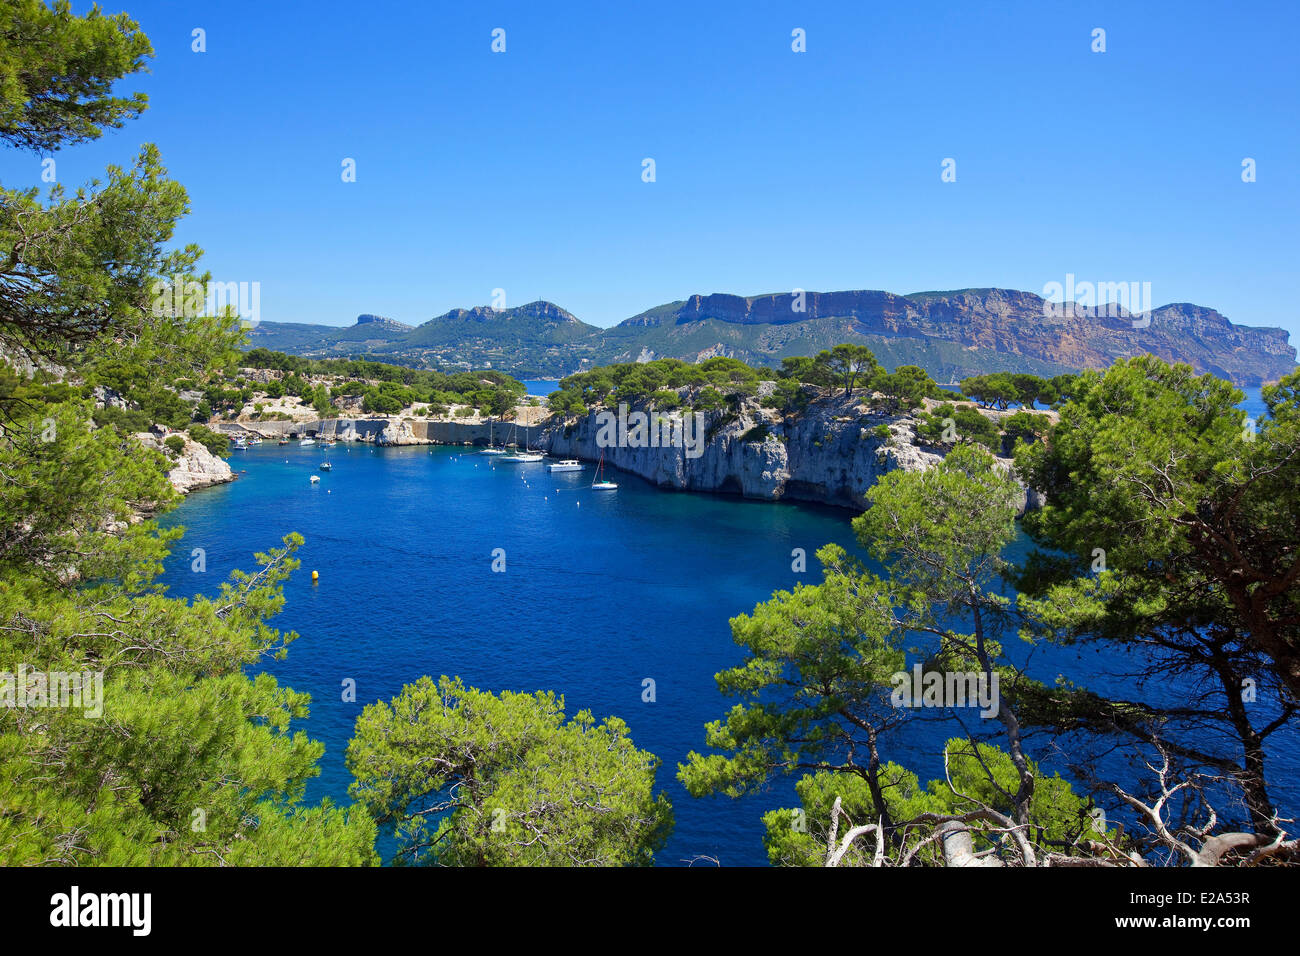 Calanque port miou in cassis hi-res stock photography and images - Alamy